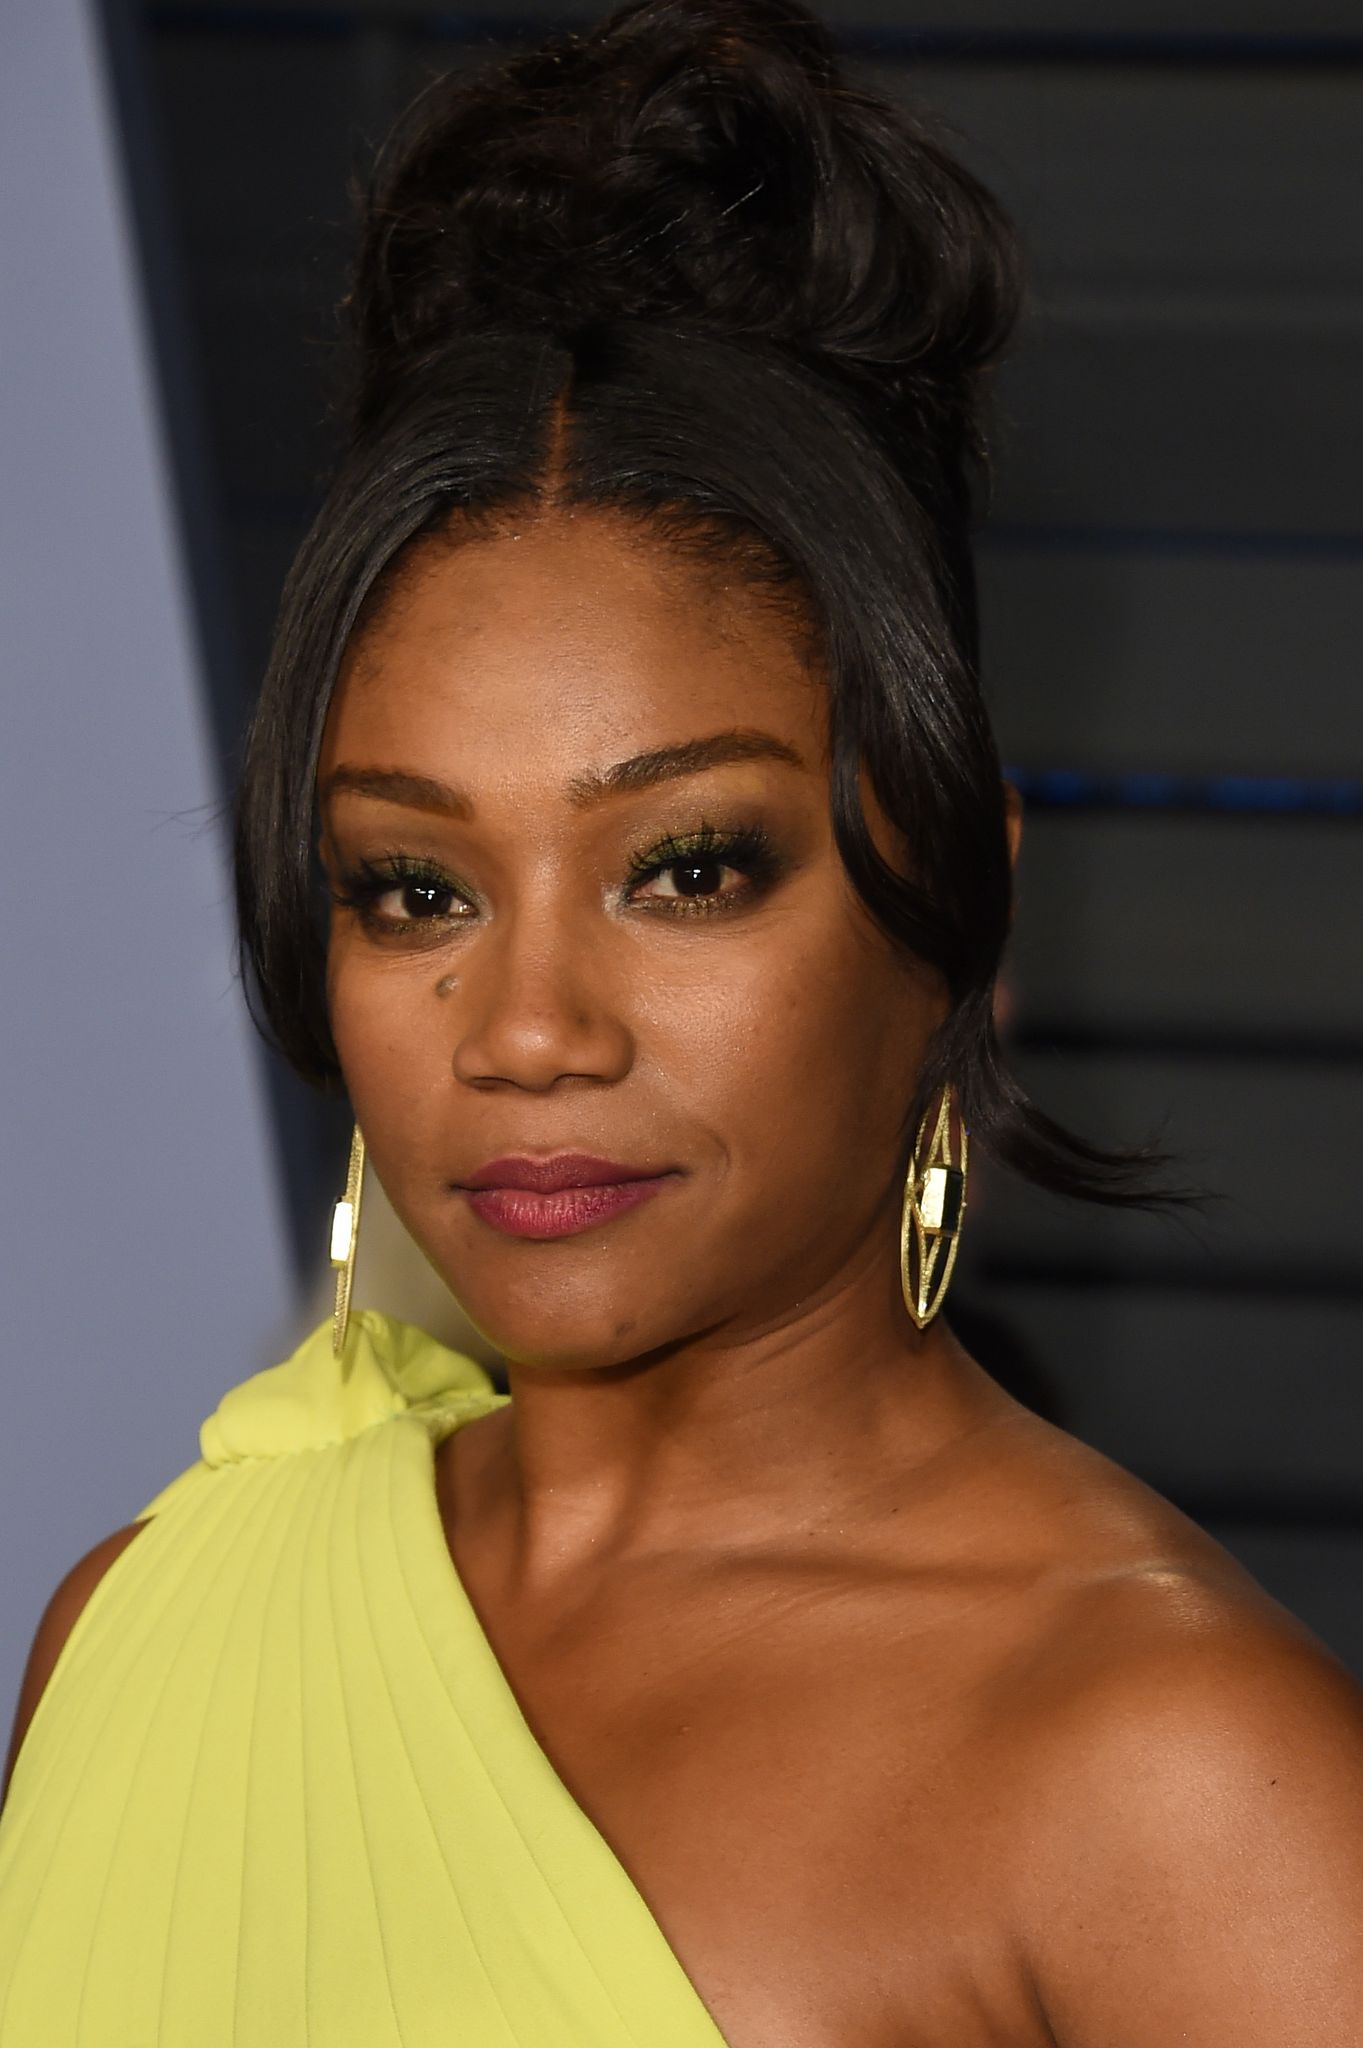 Tiffany Haddish attends the 2018 Vanity Fair Oscar Party hosted by Radhika Jones at the Wallis Annenberg Center for the Performing Arts on March 4, 2018 | Photo: Getty Images